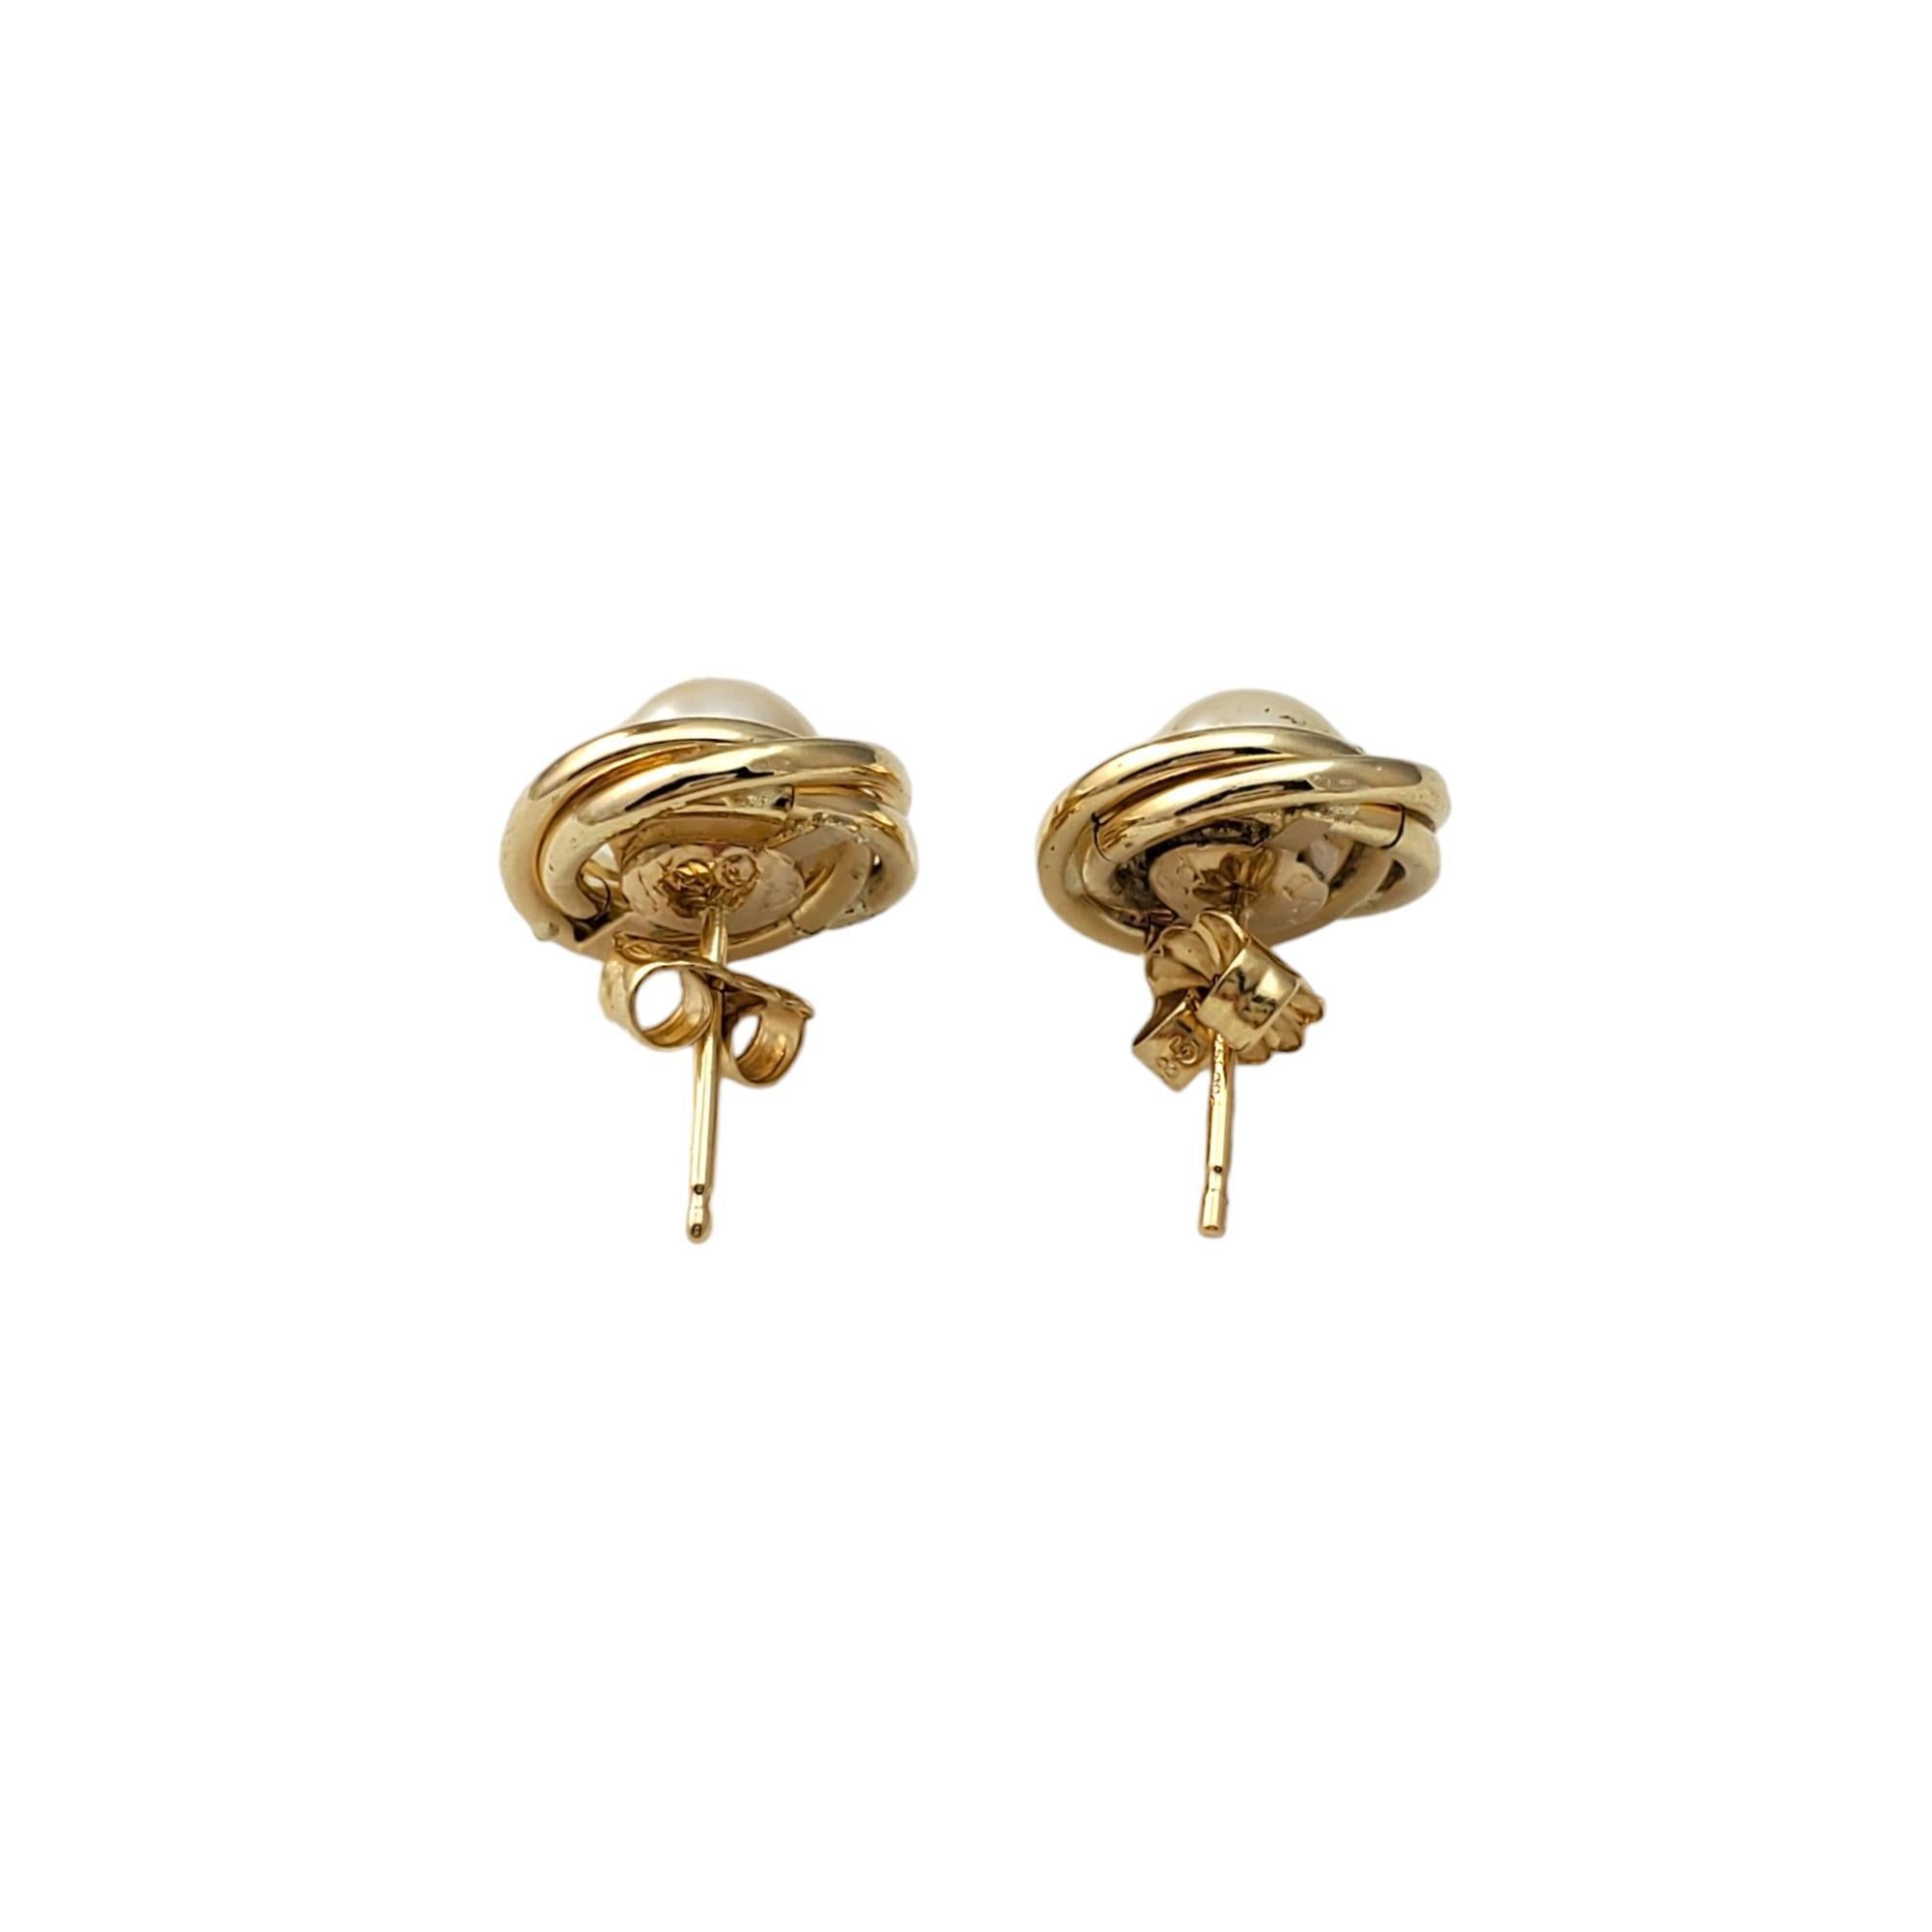 Vintage 14K Yellow Gold Pearl Earrings - 

These timeless earrings are crafted in beautifully detailed 14K yellow gold. 

Weight: 1.3 dwt/ 2.1 g

Size: 16.27mm X 11.71mm 

Hallmark: 14K 

Very good condition, professionally polished.

Will come